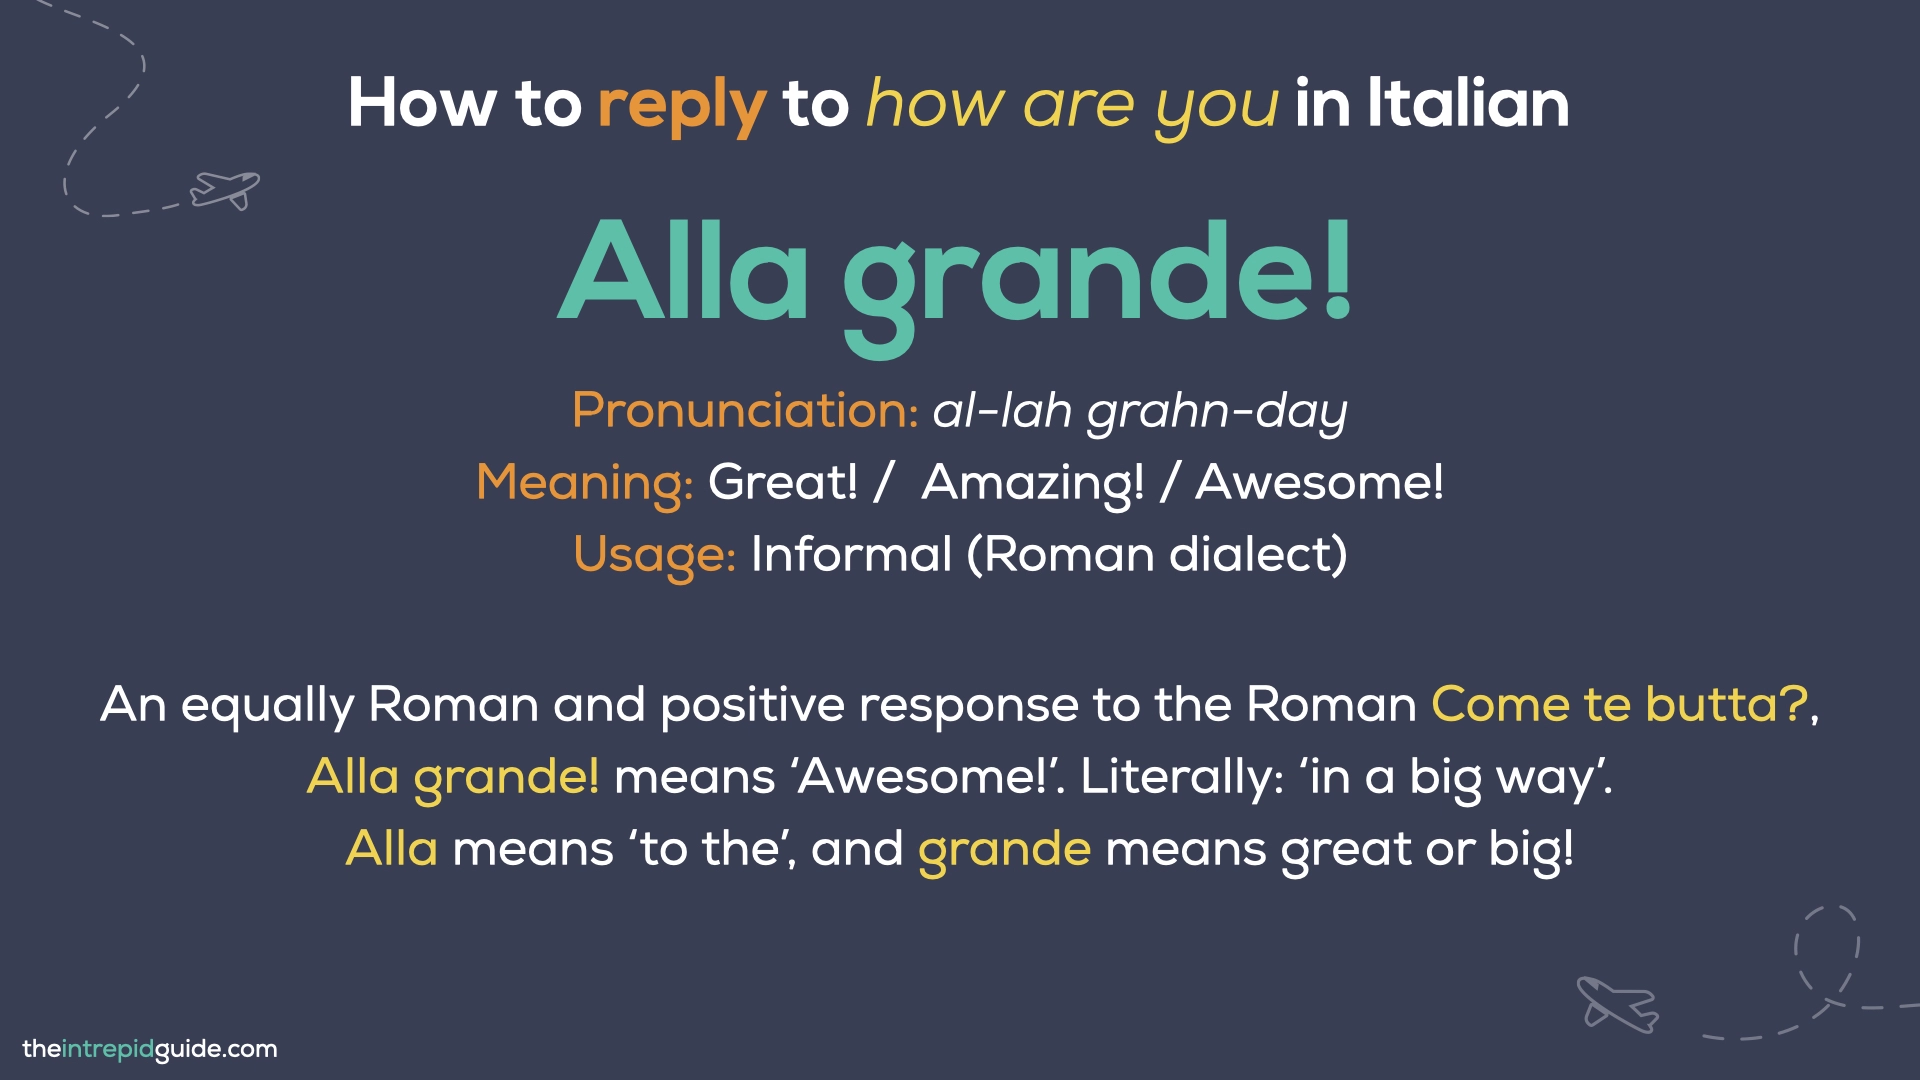 How to say How are you in Italian - Alla grande